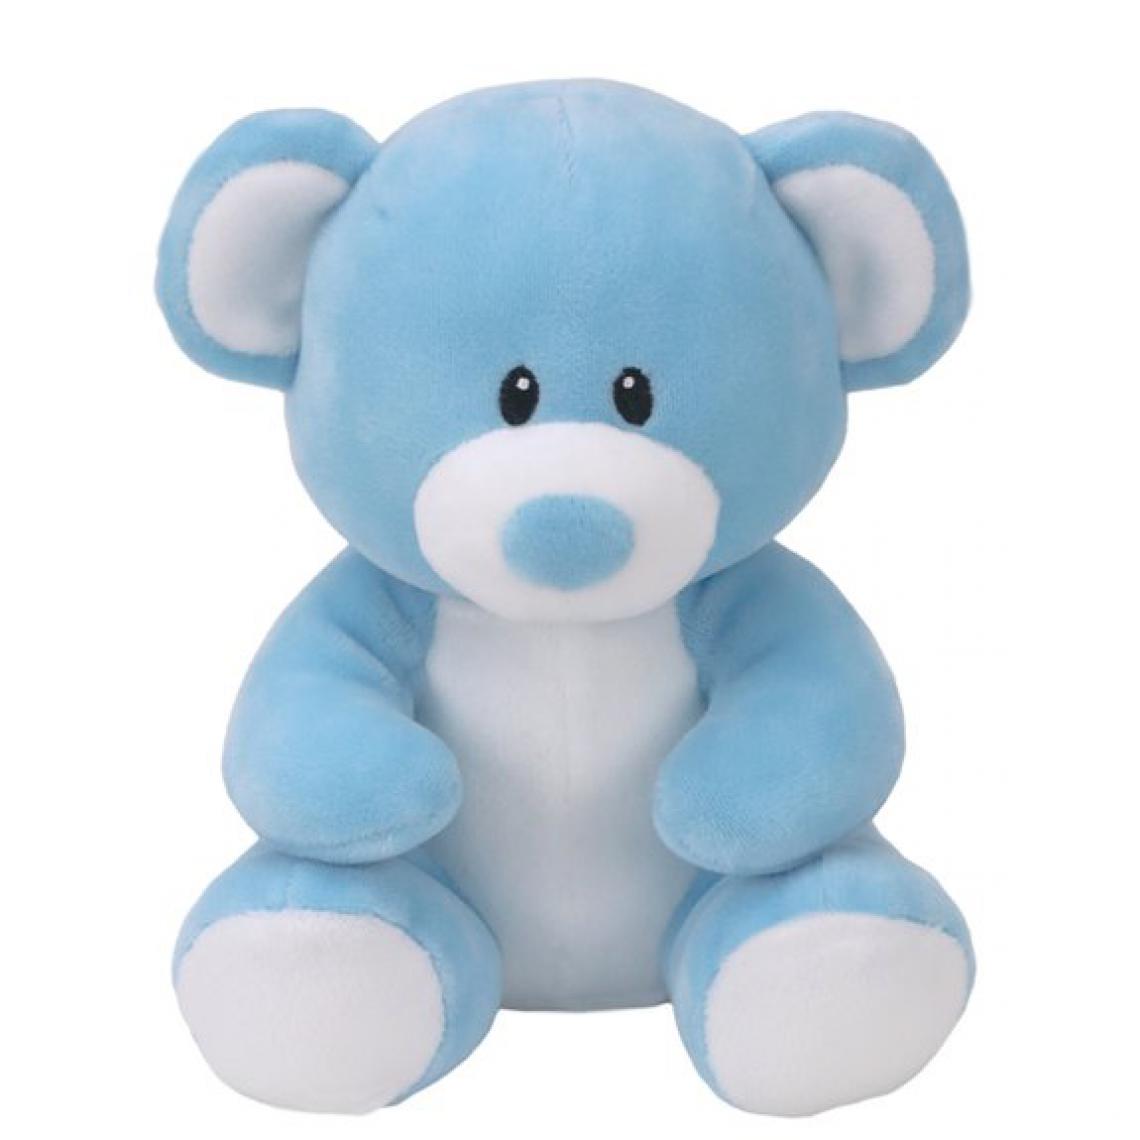 Ludendo - Baby Ty - Peluche Lullaby l'Ours bleu 20 cm - Animaux